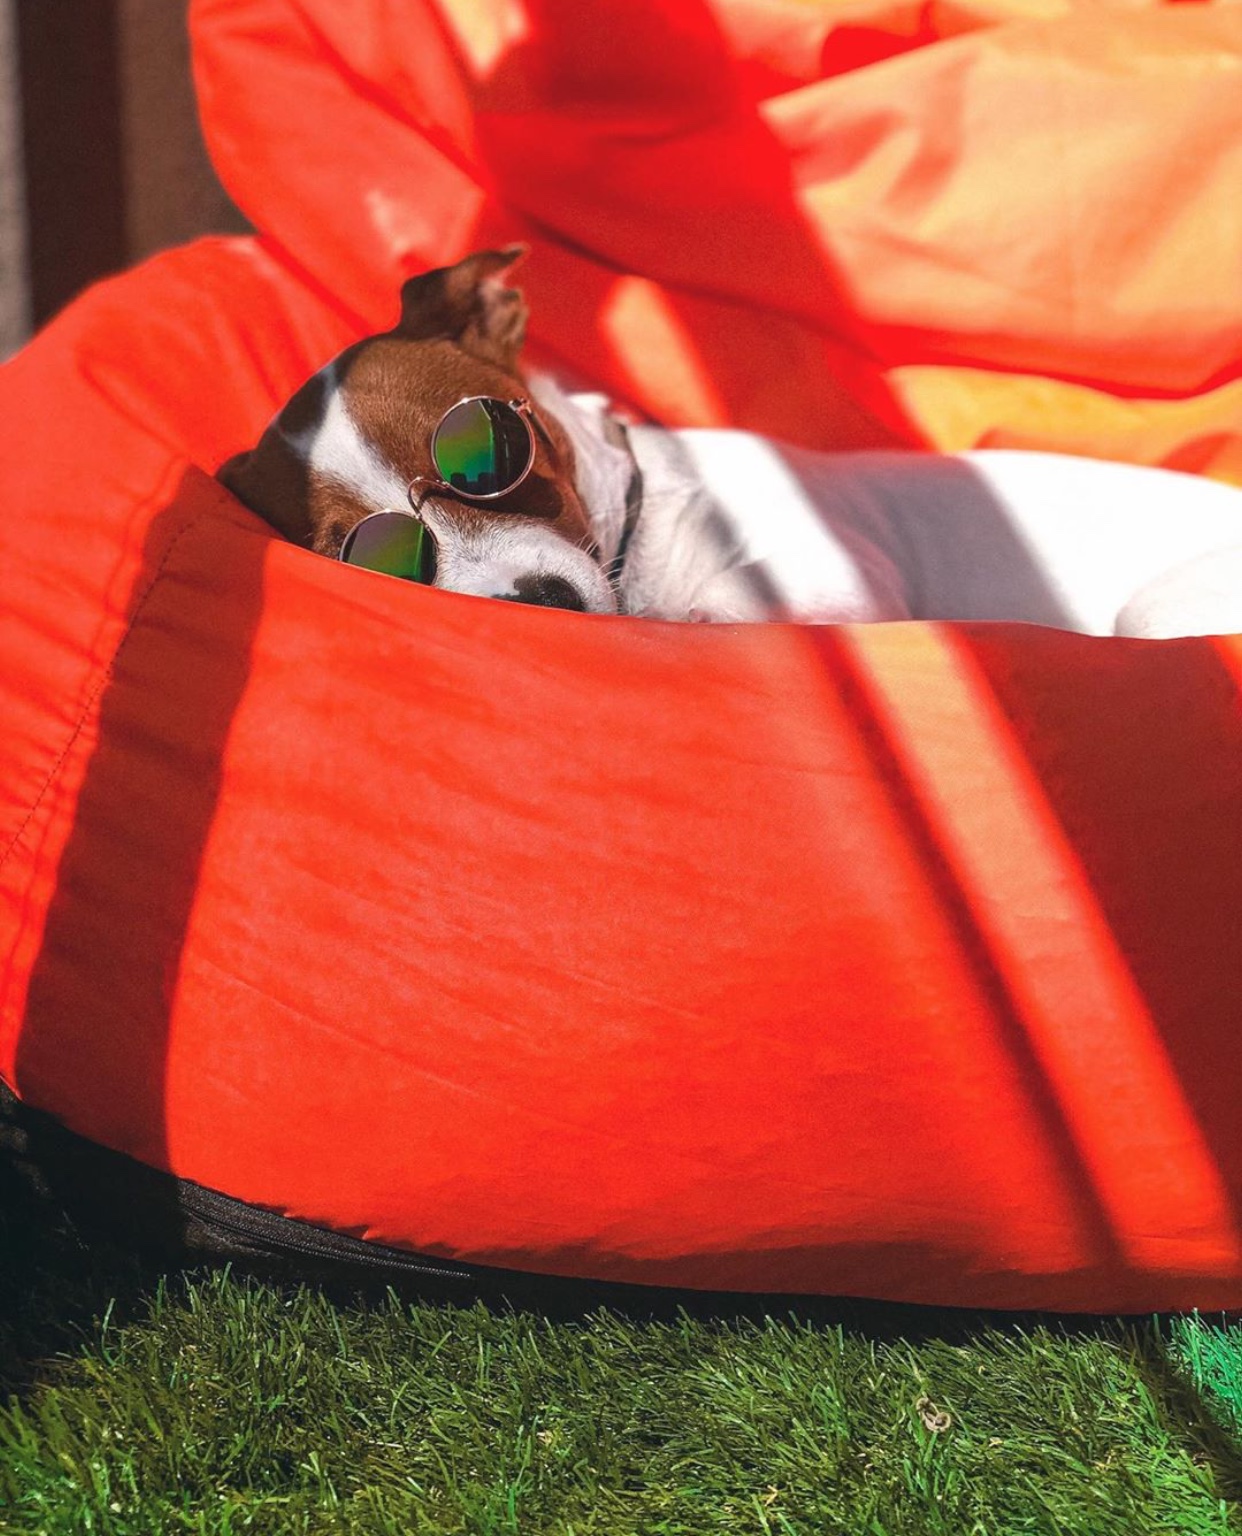 Jack Russell Terrier lying in a red inflatable chair while wearing sunglasses under the sun